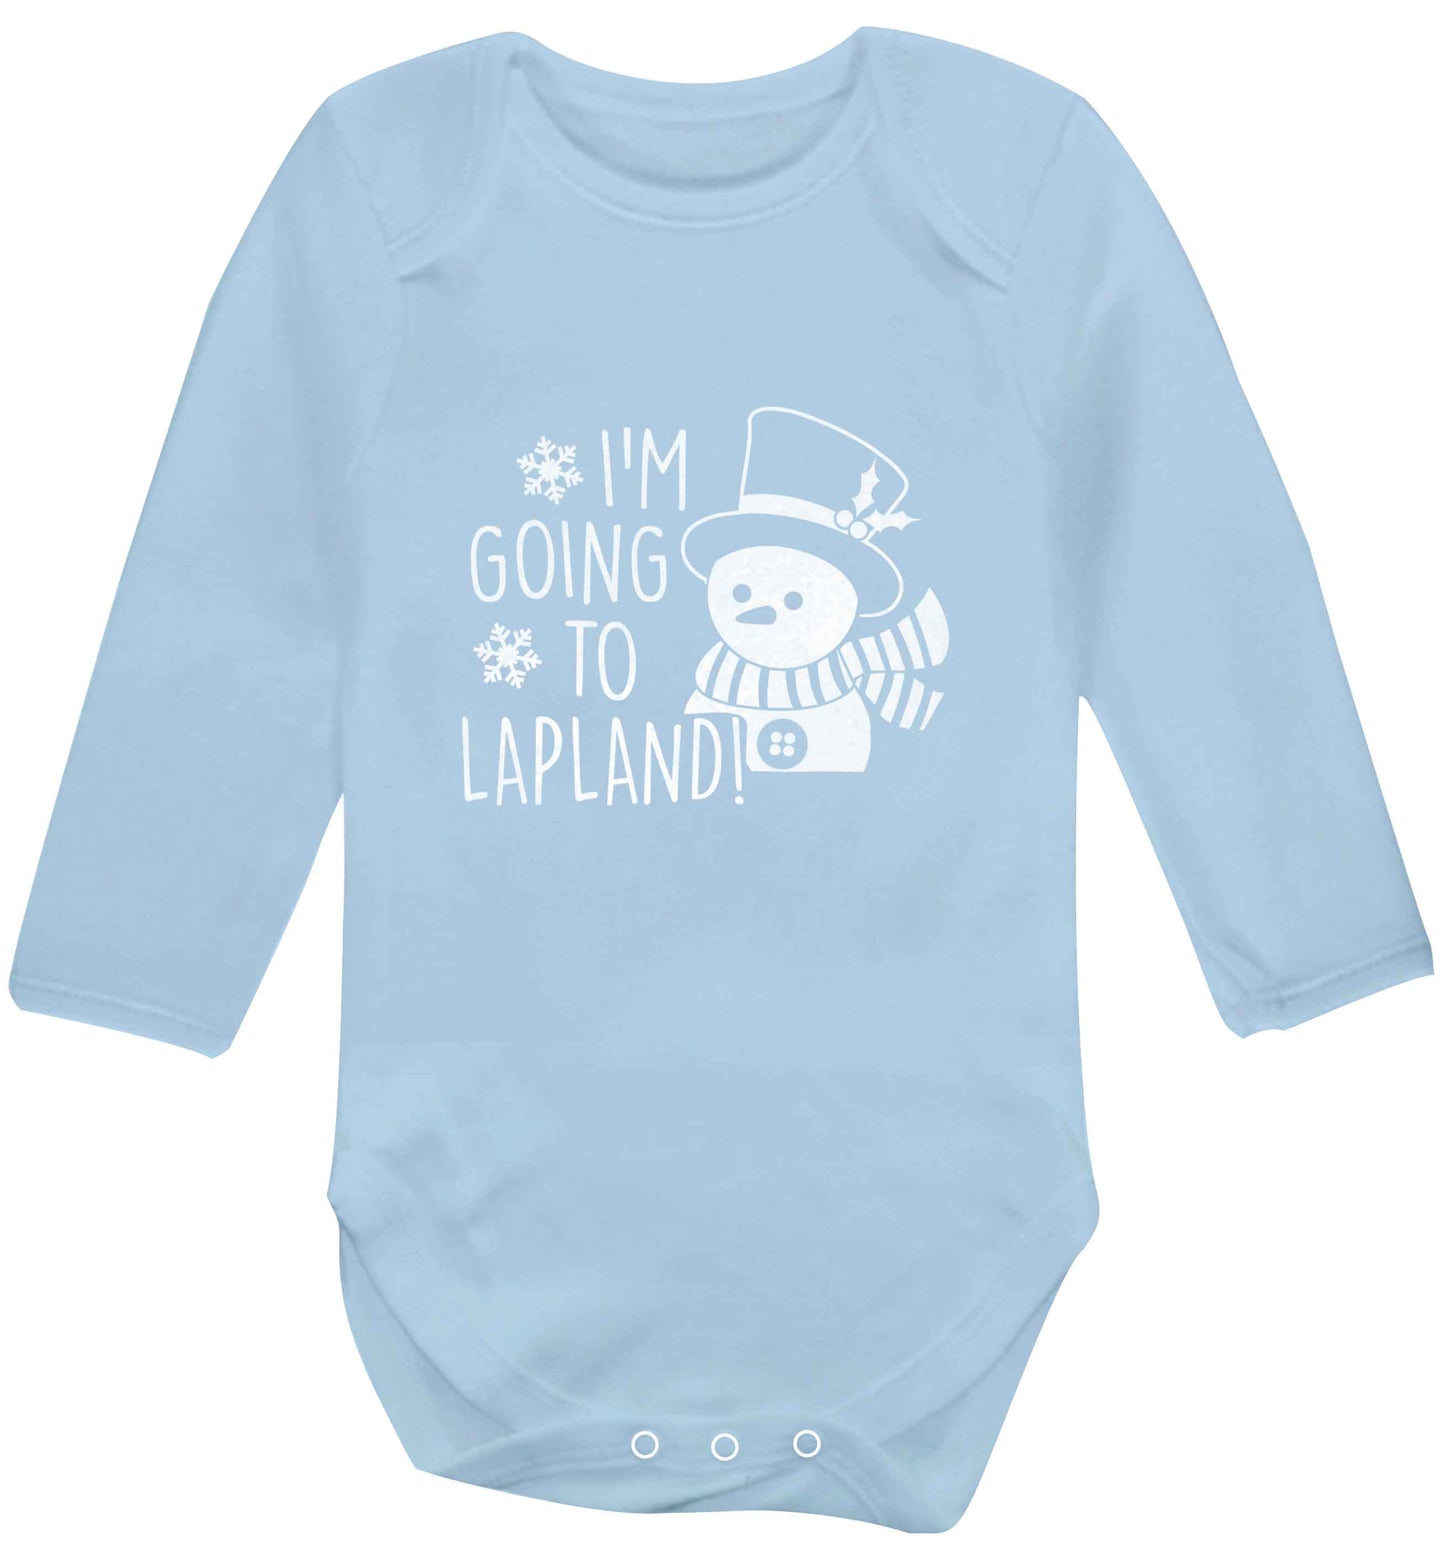 I'm going to Lapland baby vest long sleeved pale blue 6-12 months